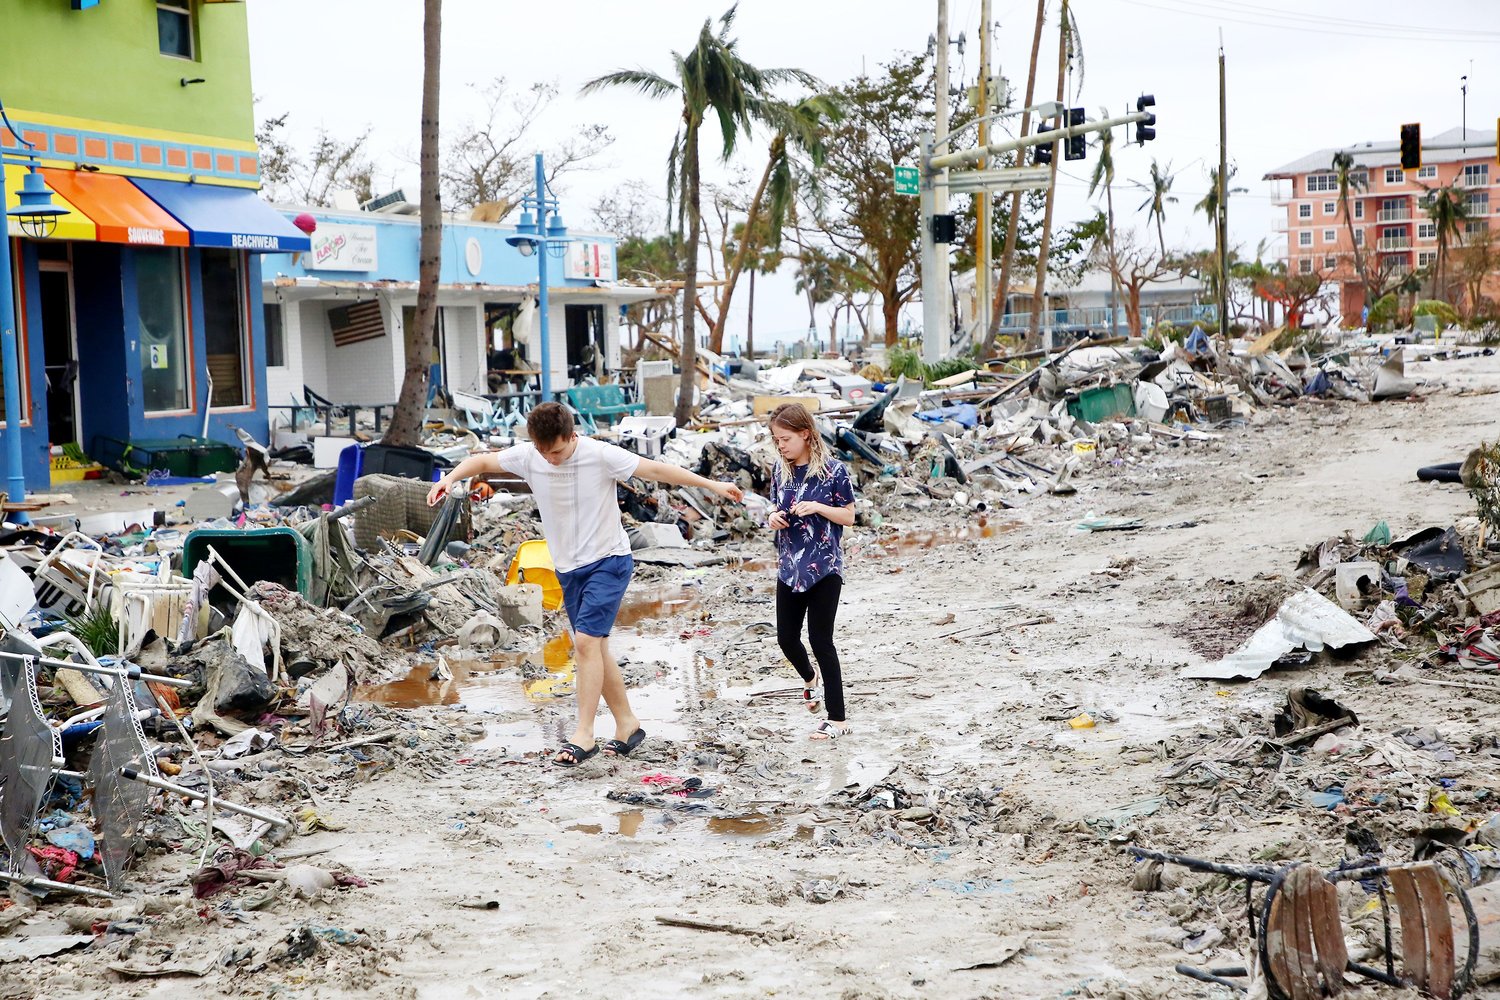 Jake Moses, 19, left, and Heather Jones, 18, of Fort Myers, explore a section of destroyed businesses at Fort Myers Beach on Thursday, Sep. 29, 2022. The community was mostly destroyed after Hurricane Ian made landfall on Wednesday. (Douglas R. Clifford/Tamps Bay Times/TNS)